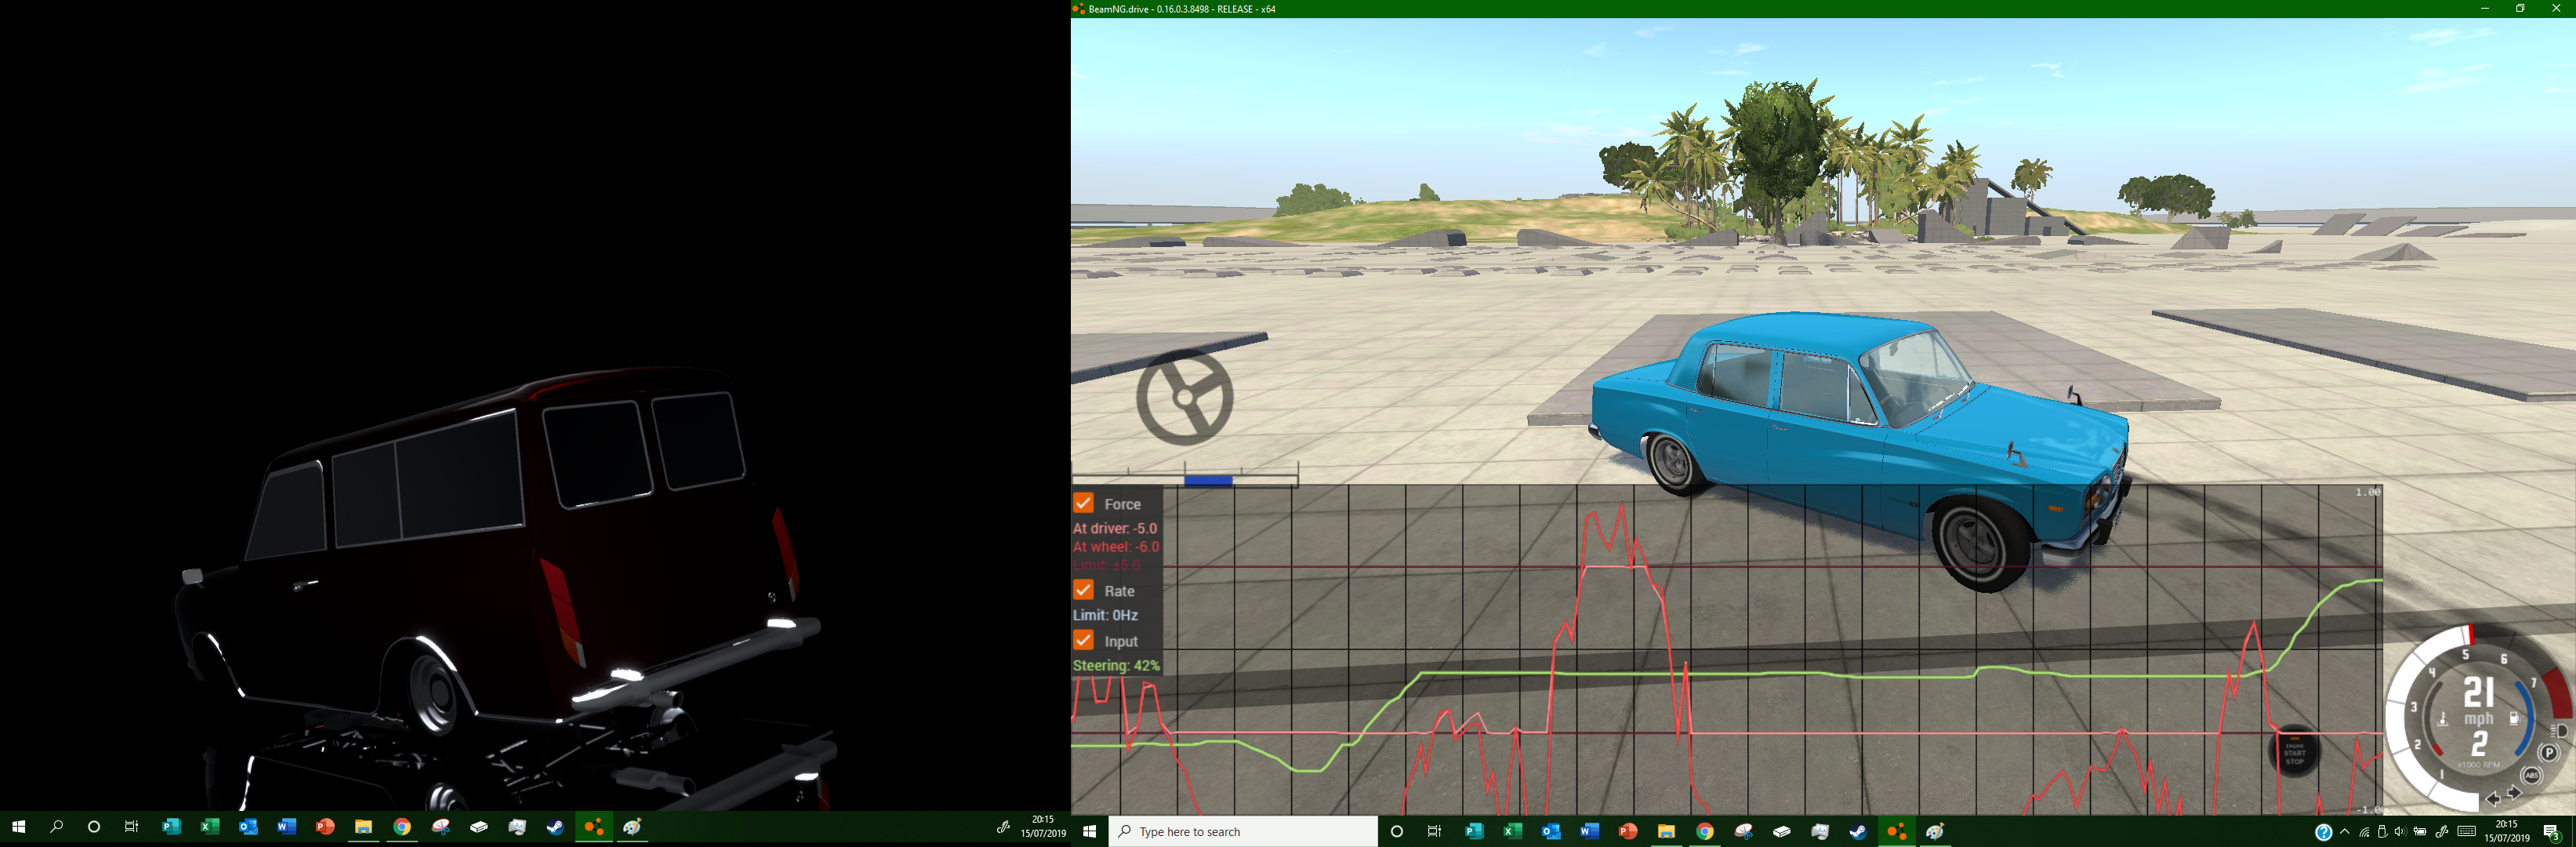 Logitech g920 turns all the way right. | BeamNG